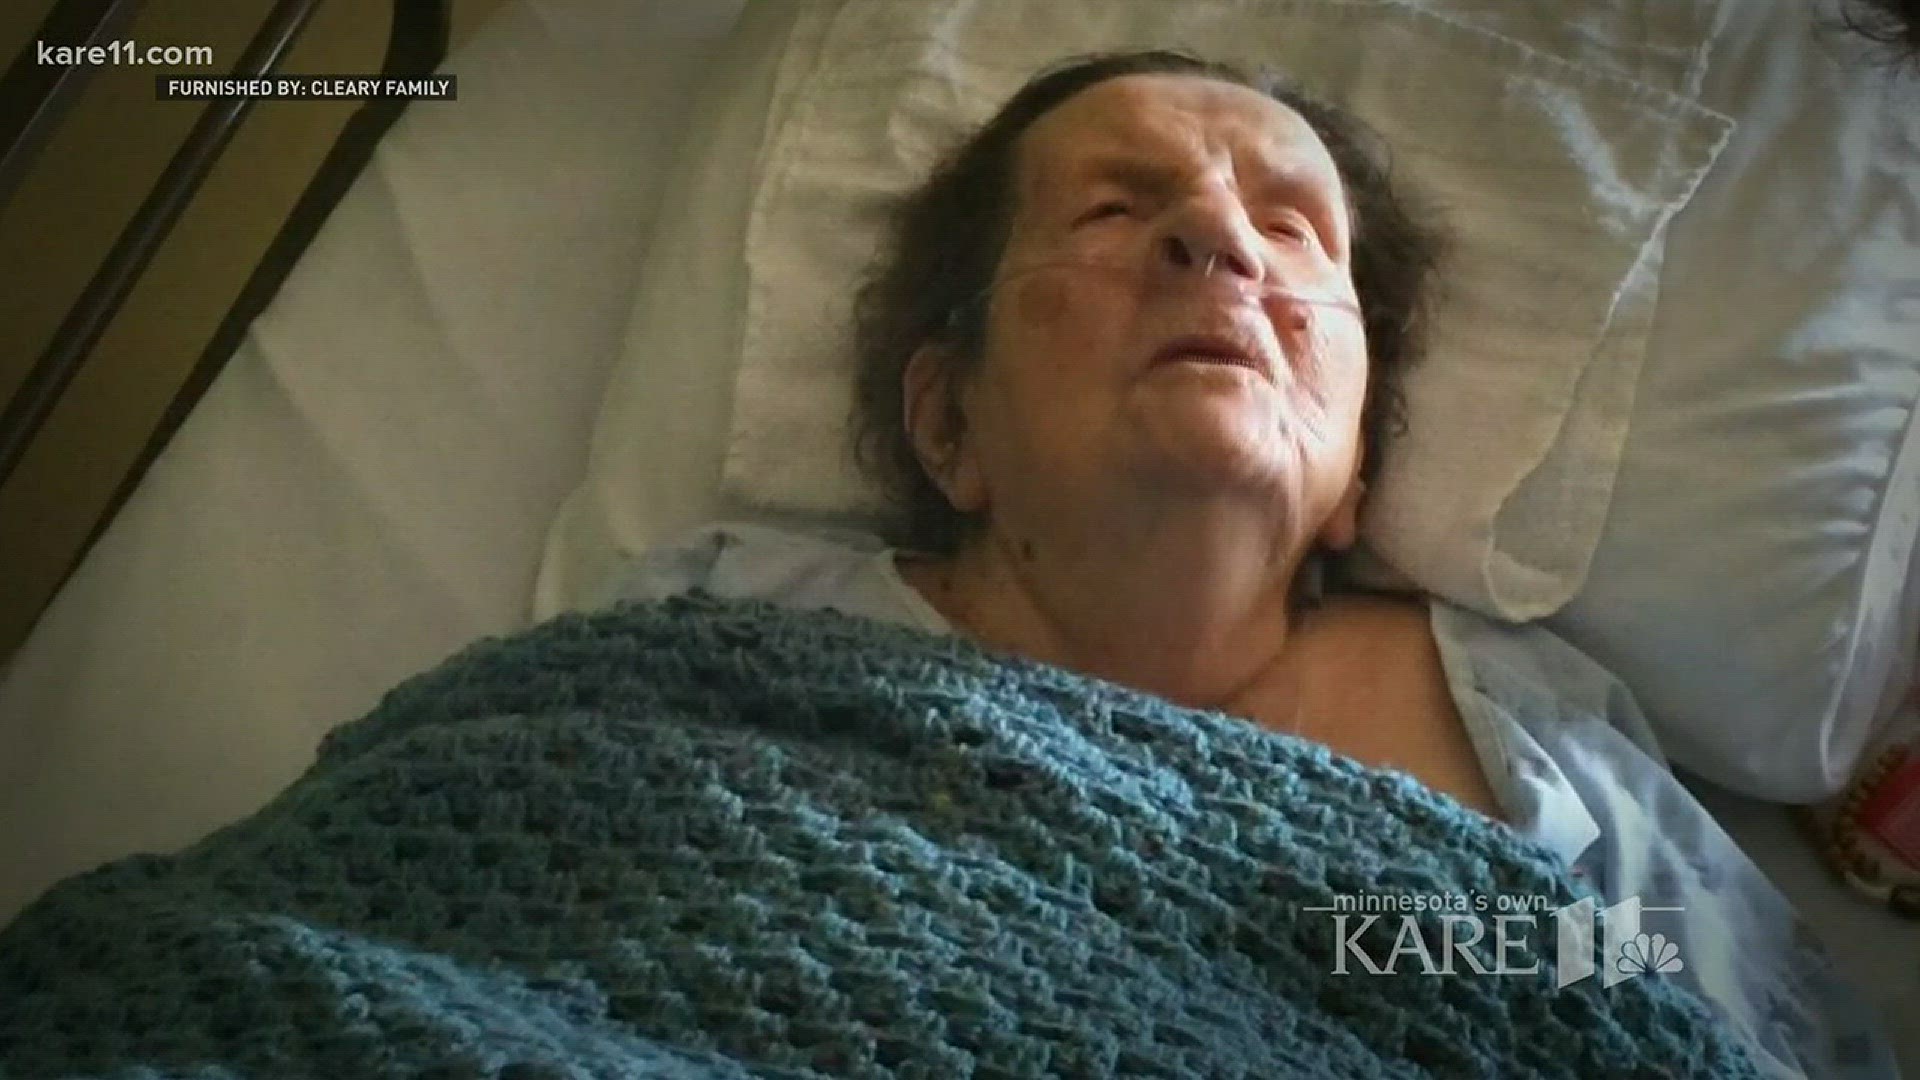 Controversy over state investigations of elder abuse complaints prompts resignation. http://kare11.tv/2DbdzFB